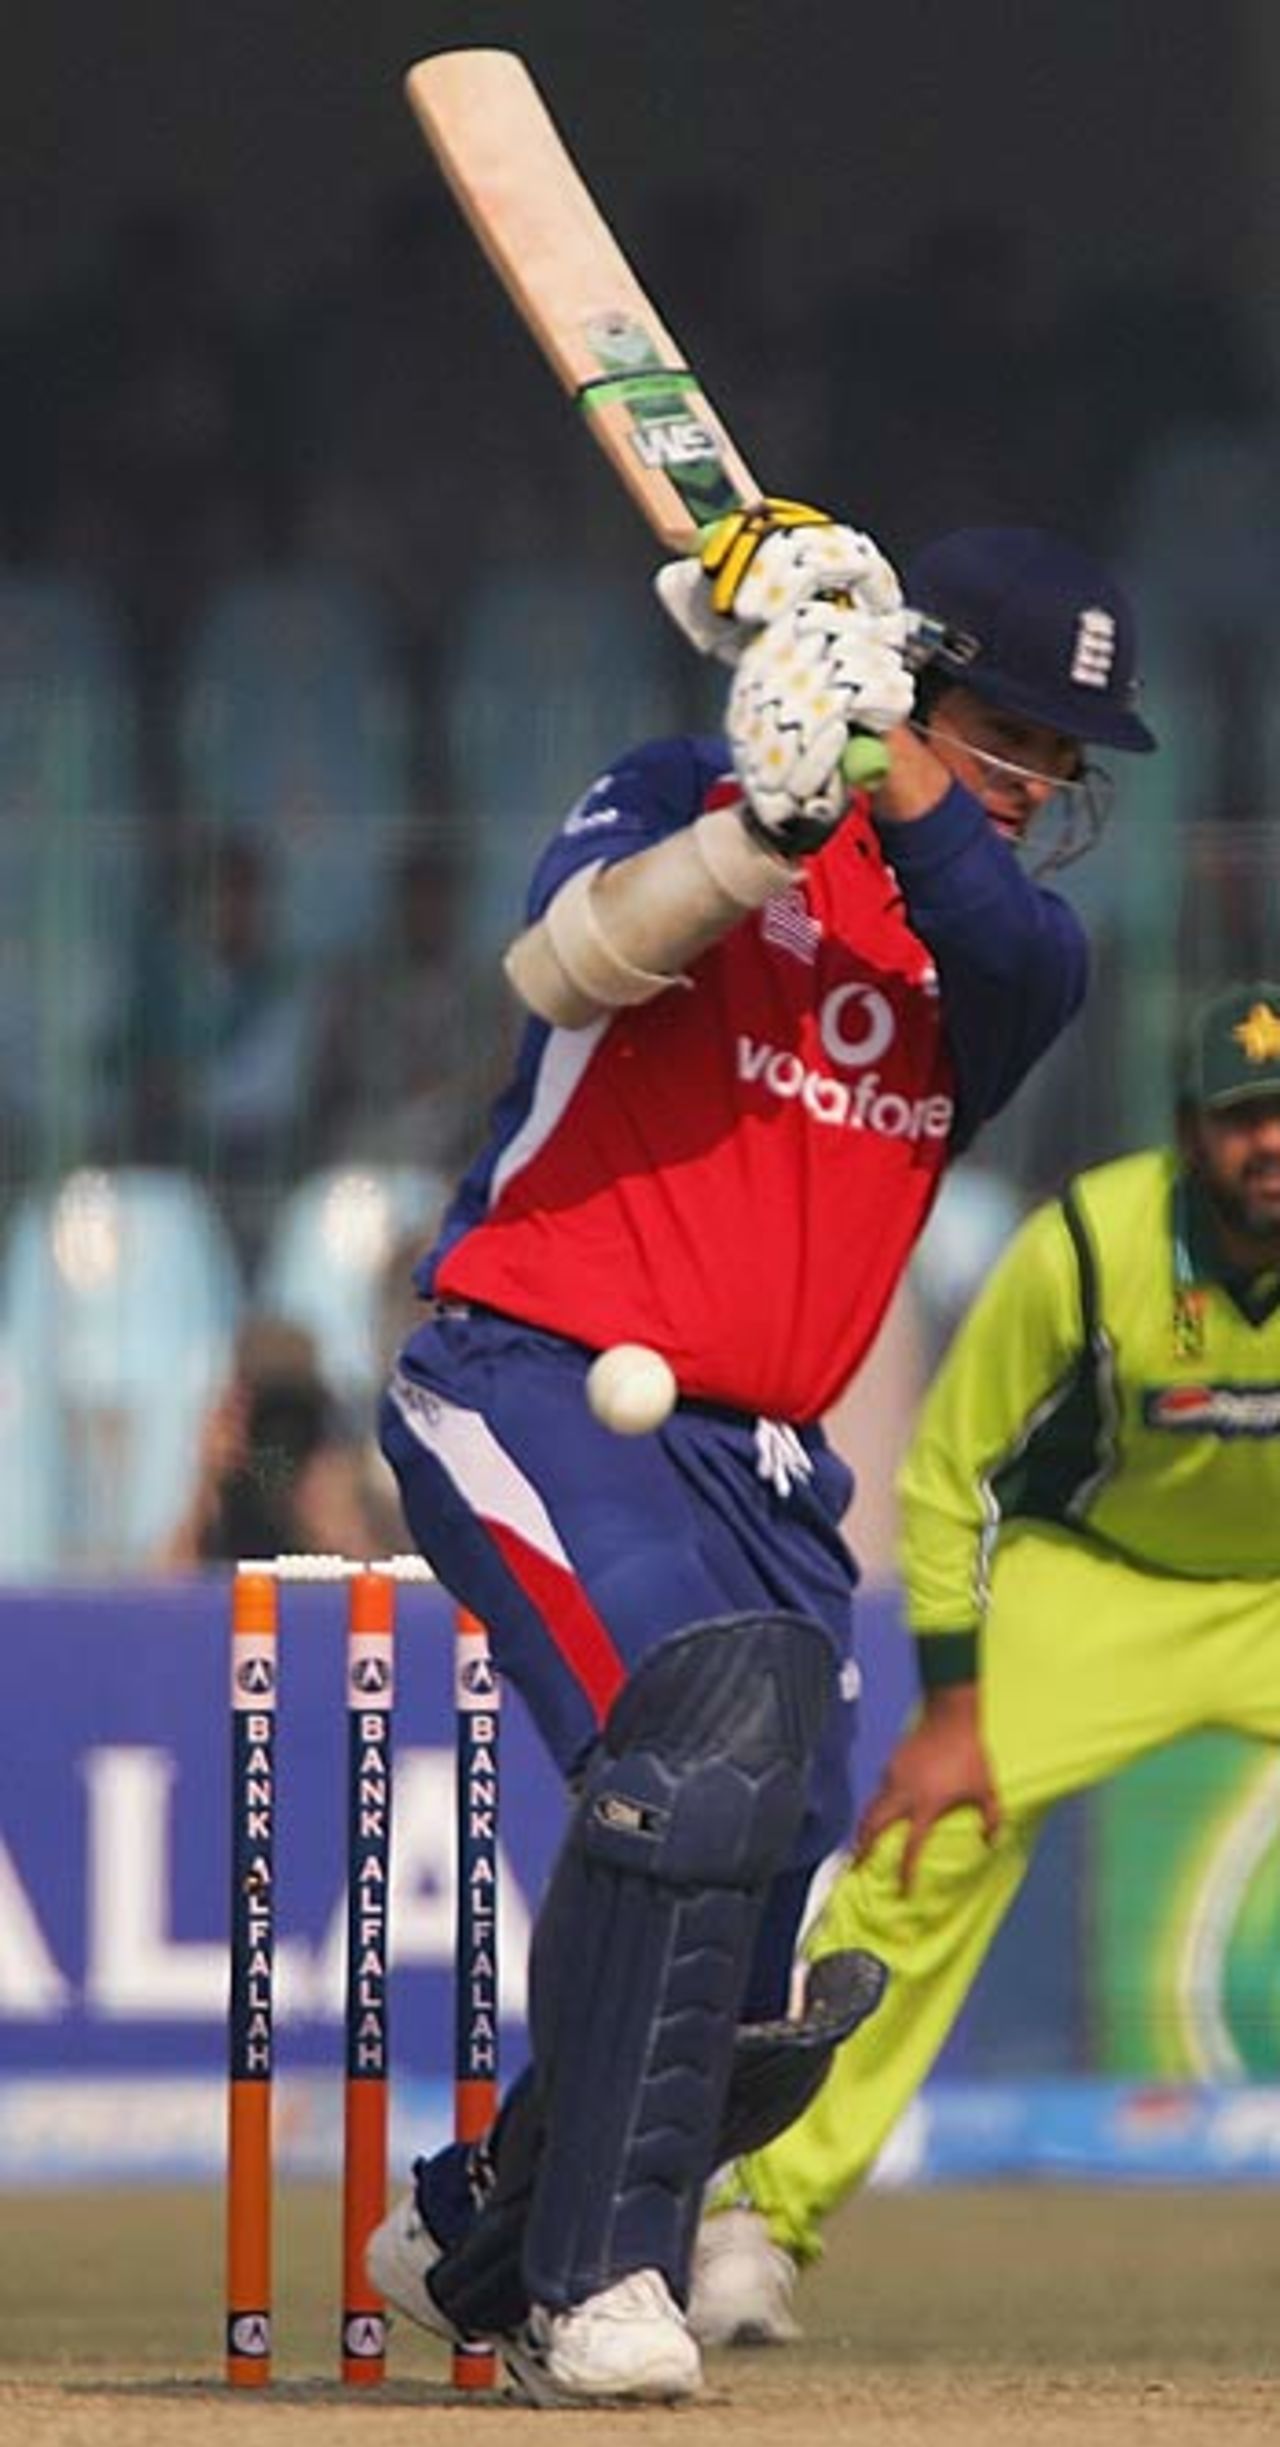 Marcus Trescothick on the attack, Pakistan v England, 2nd ODI, Lahore, December 12, 2005